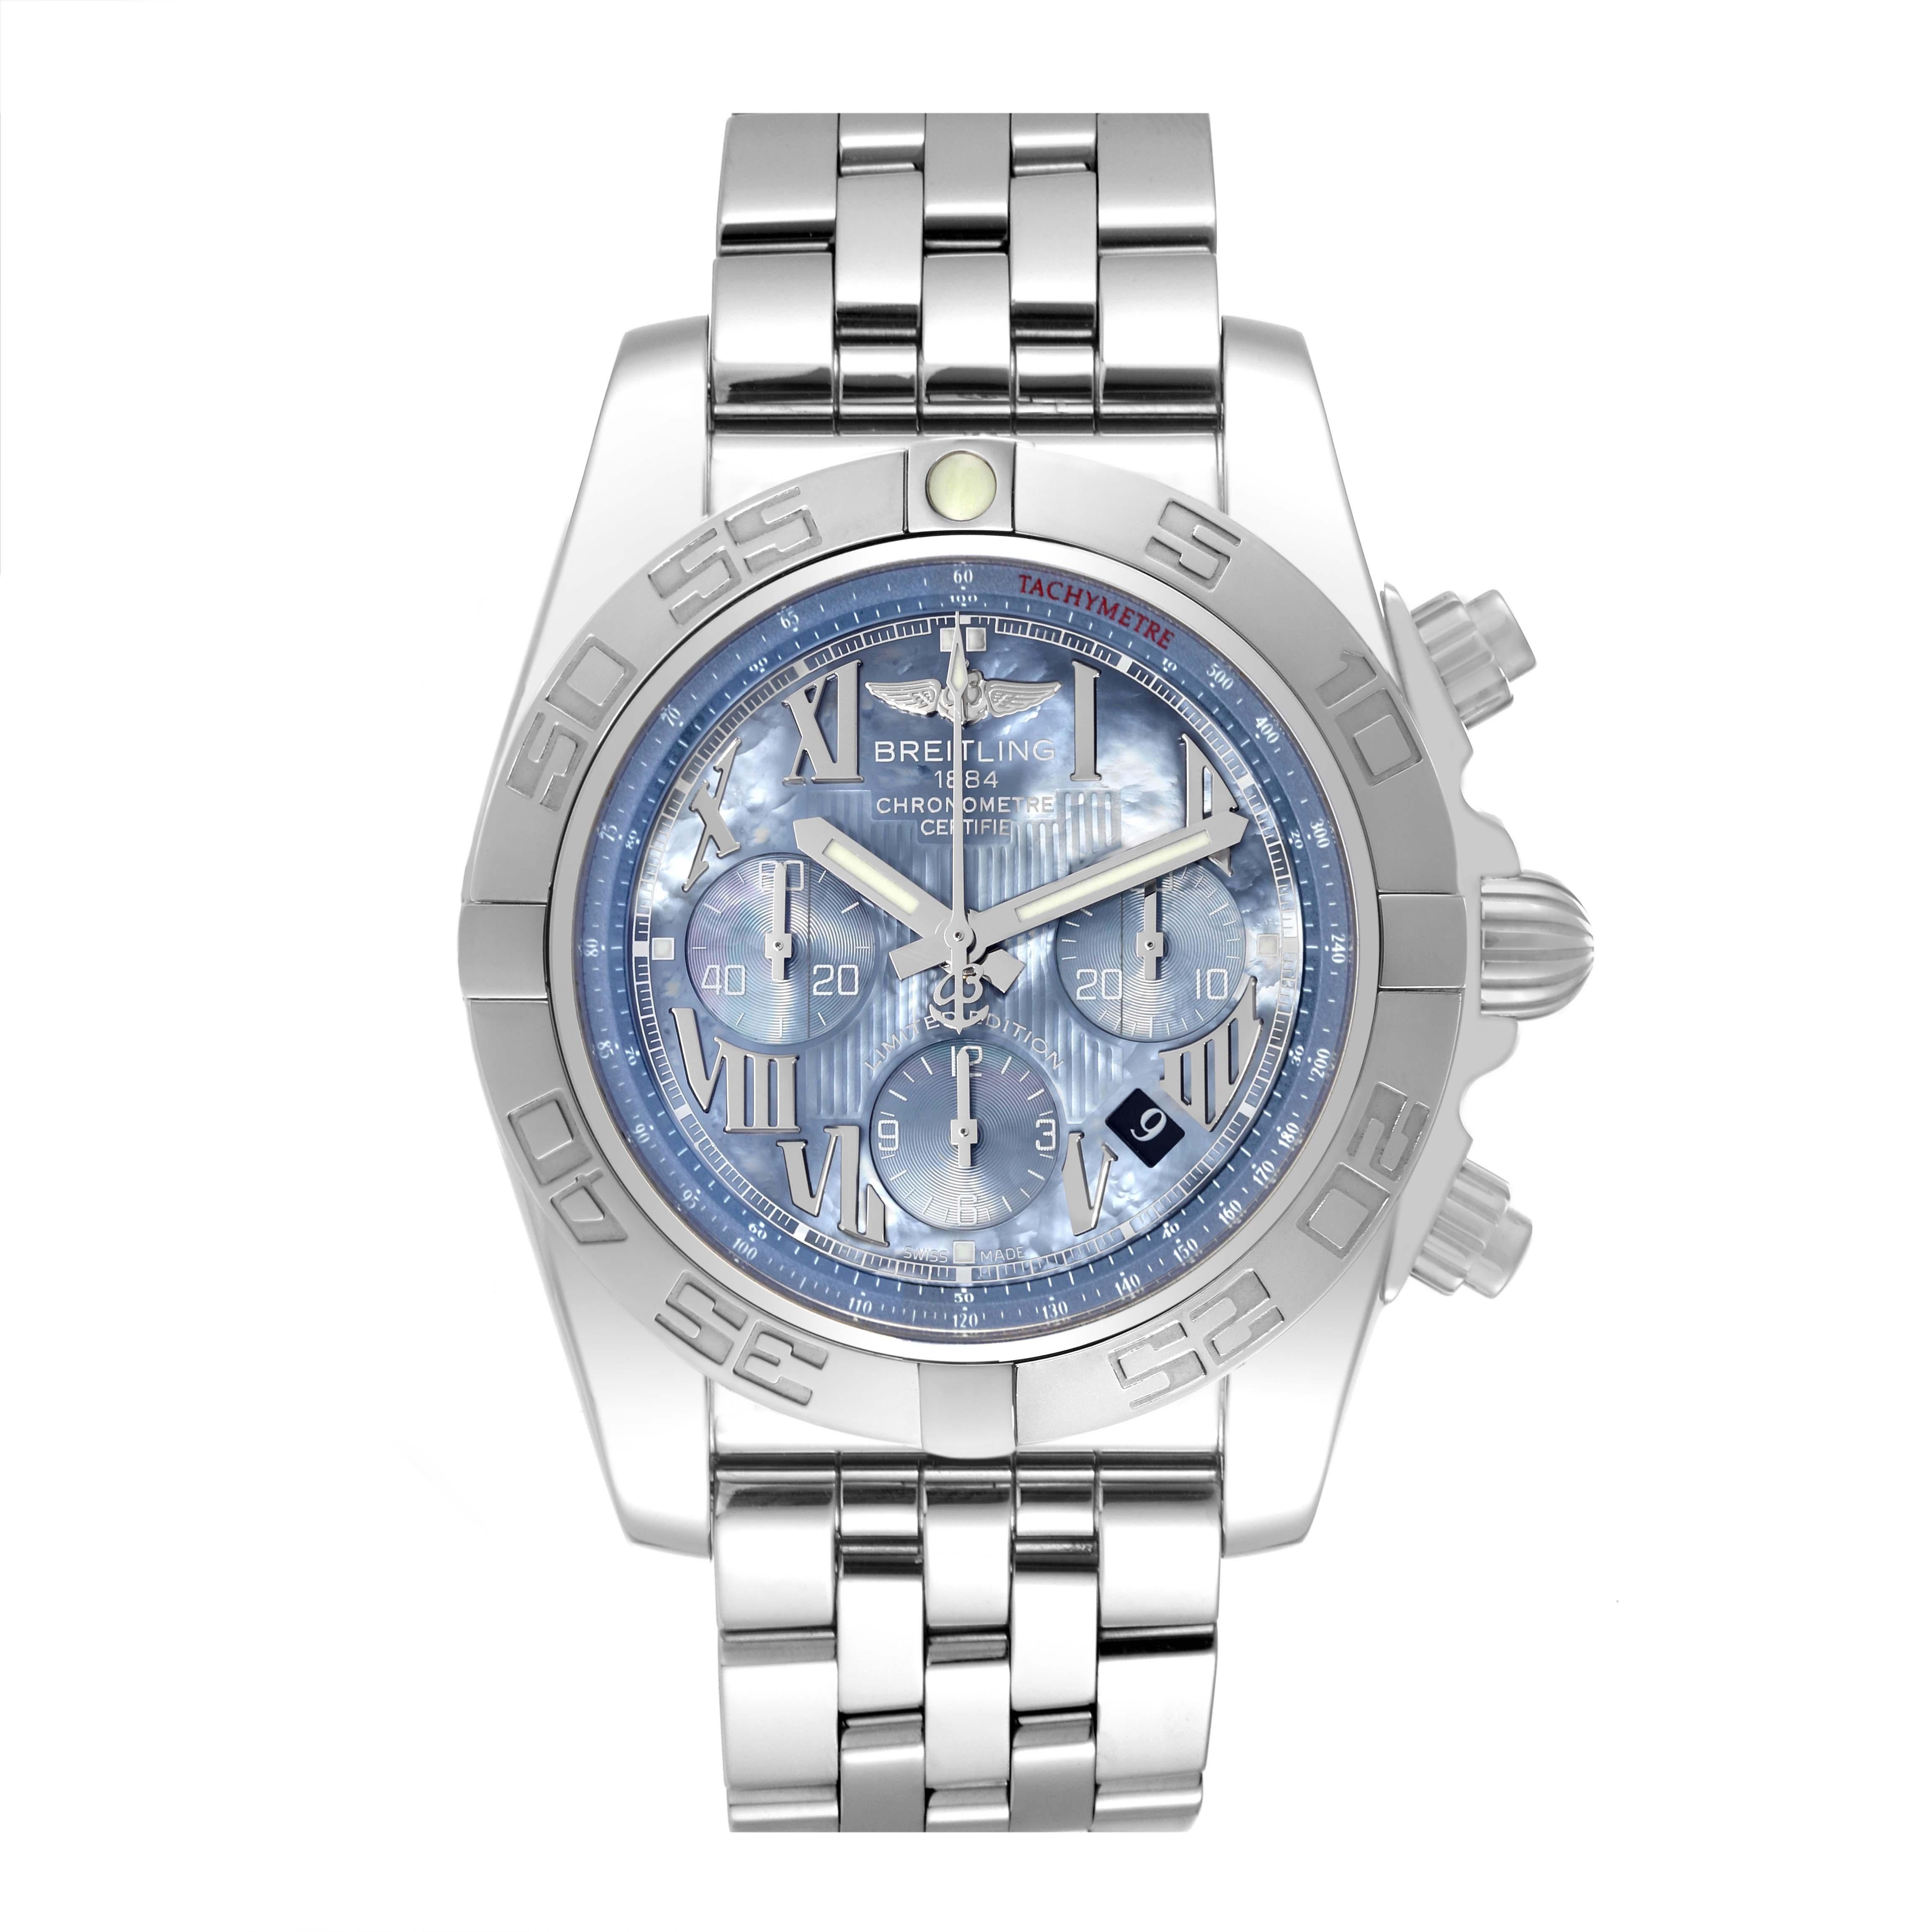 Breitling Chronomat 01 Limited Edition Blue MOP Dial Steel Mens Watch AB0110. Self-winding automatic officially certified chronometer movement. Chronograph function. Stainless steel case 43.5 mm in diameter with screwed down crown and pushers.